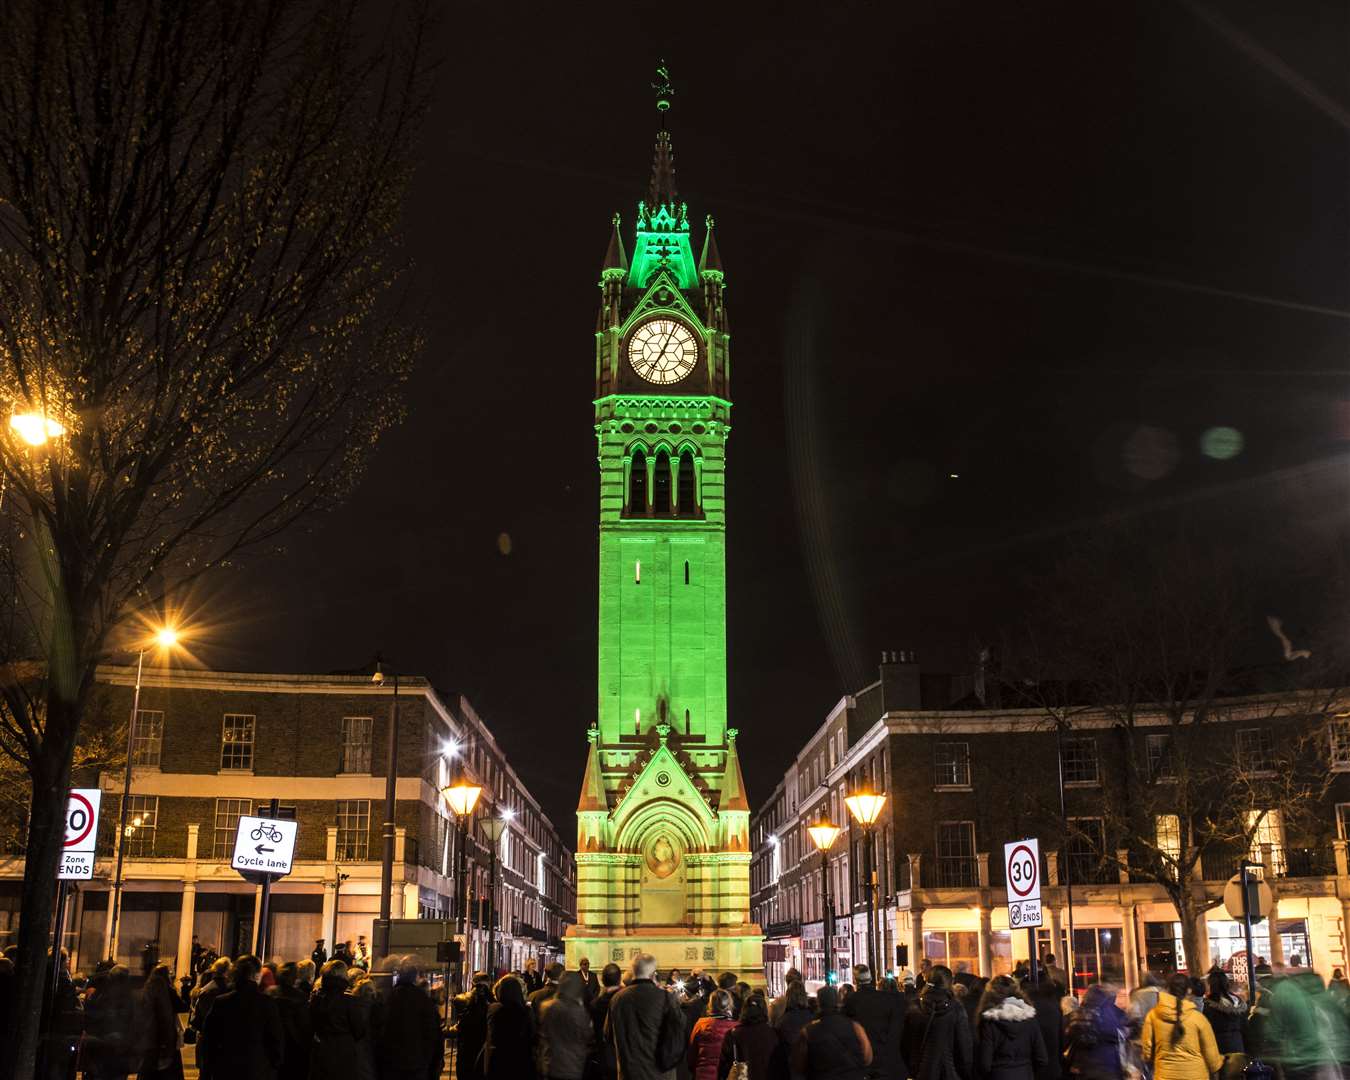 The Clock Tower in Gravesend has been lit green in the past